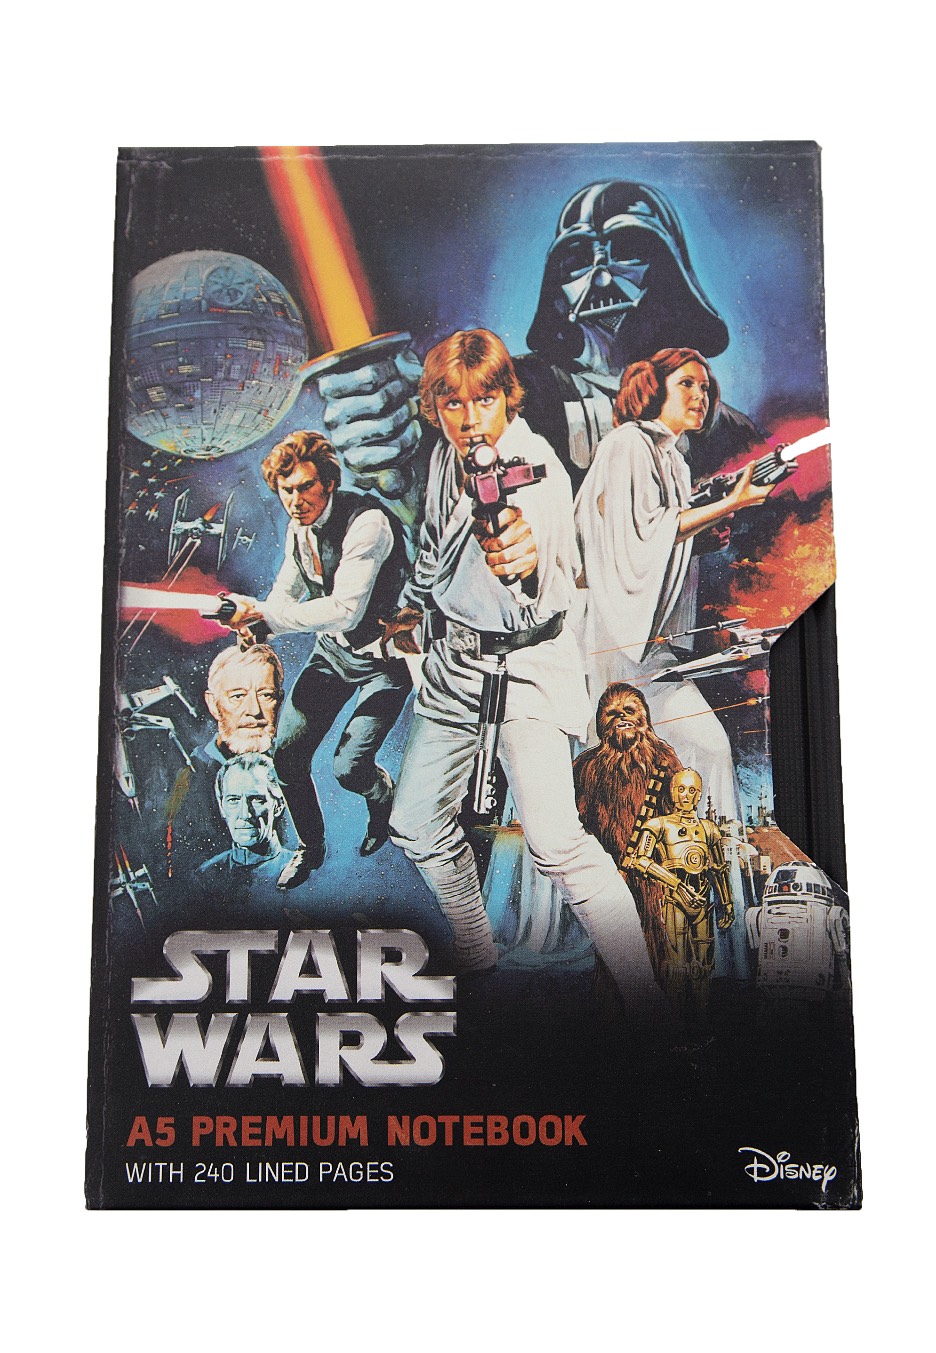 Star Wars - A New Hope VHS -